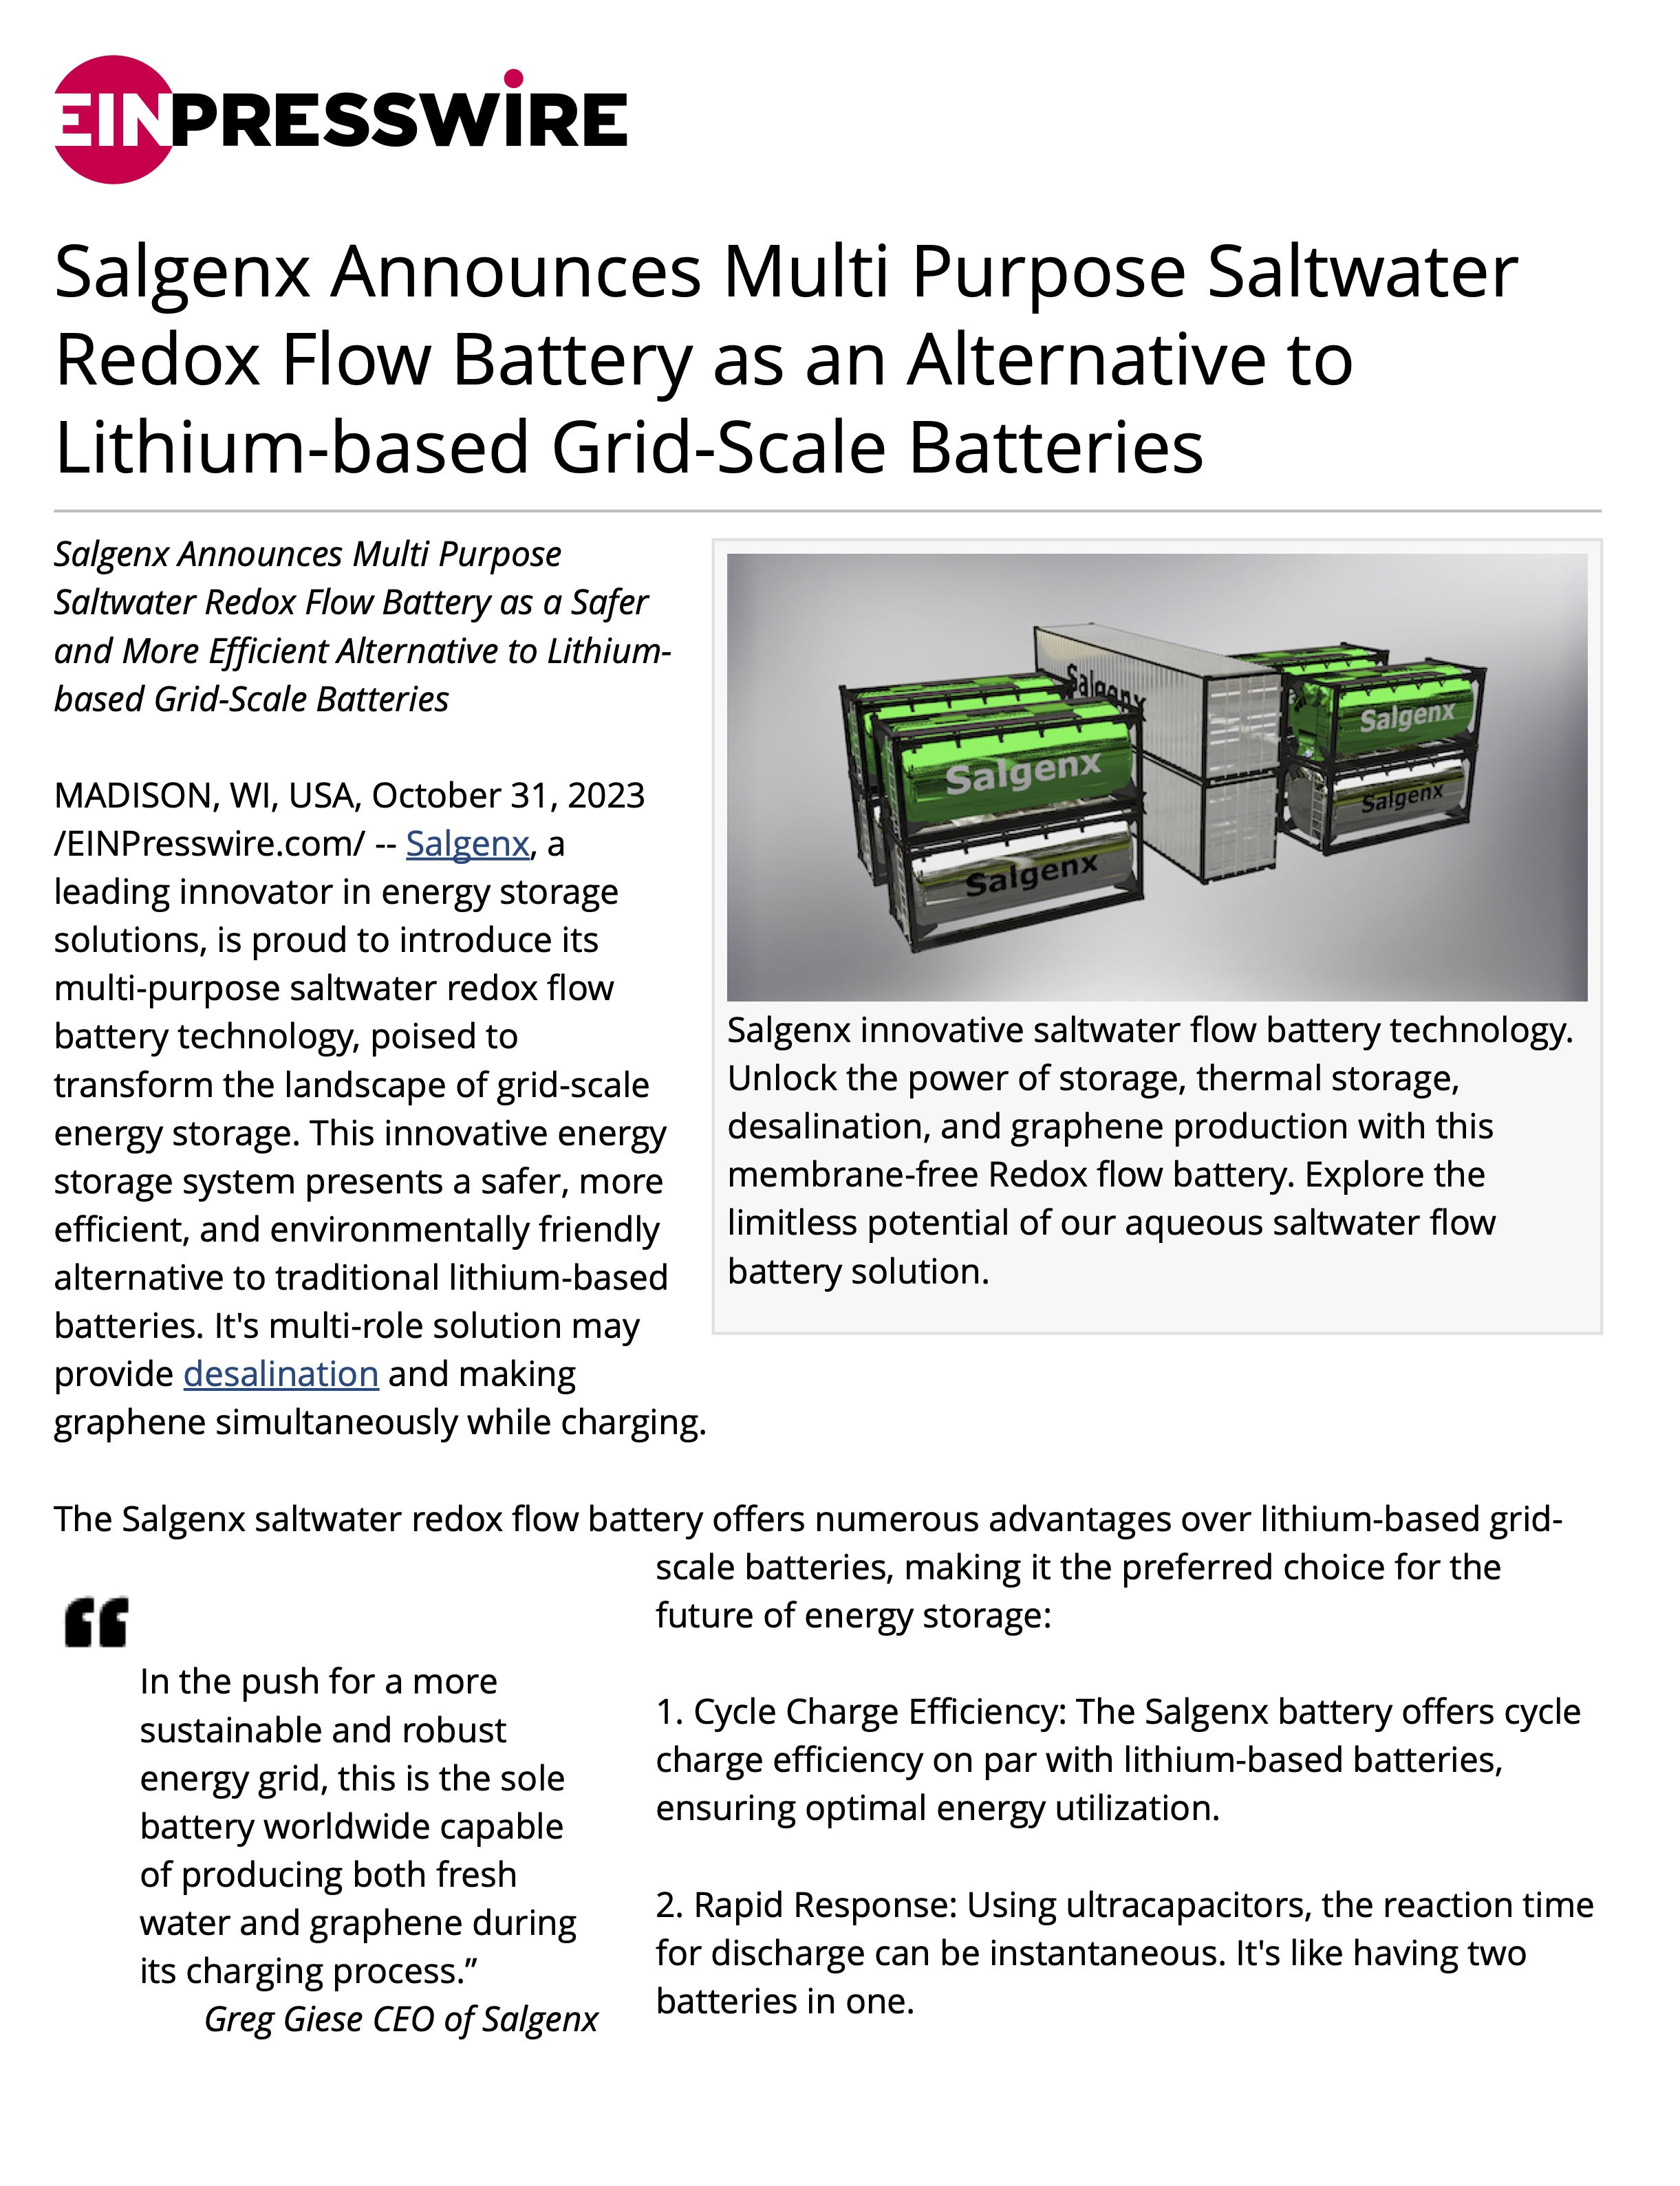 Salgenx Announces Multi Purpose Saltwater Redox Flow Battery as an Alternative to Lithium-based Grid-Scale Batteries